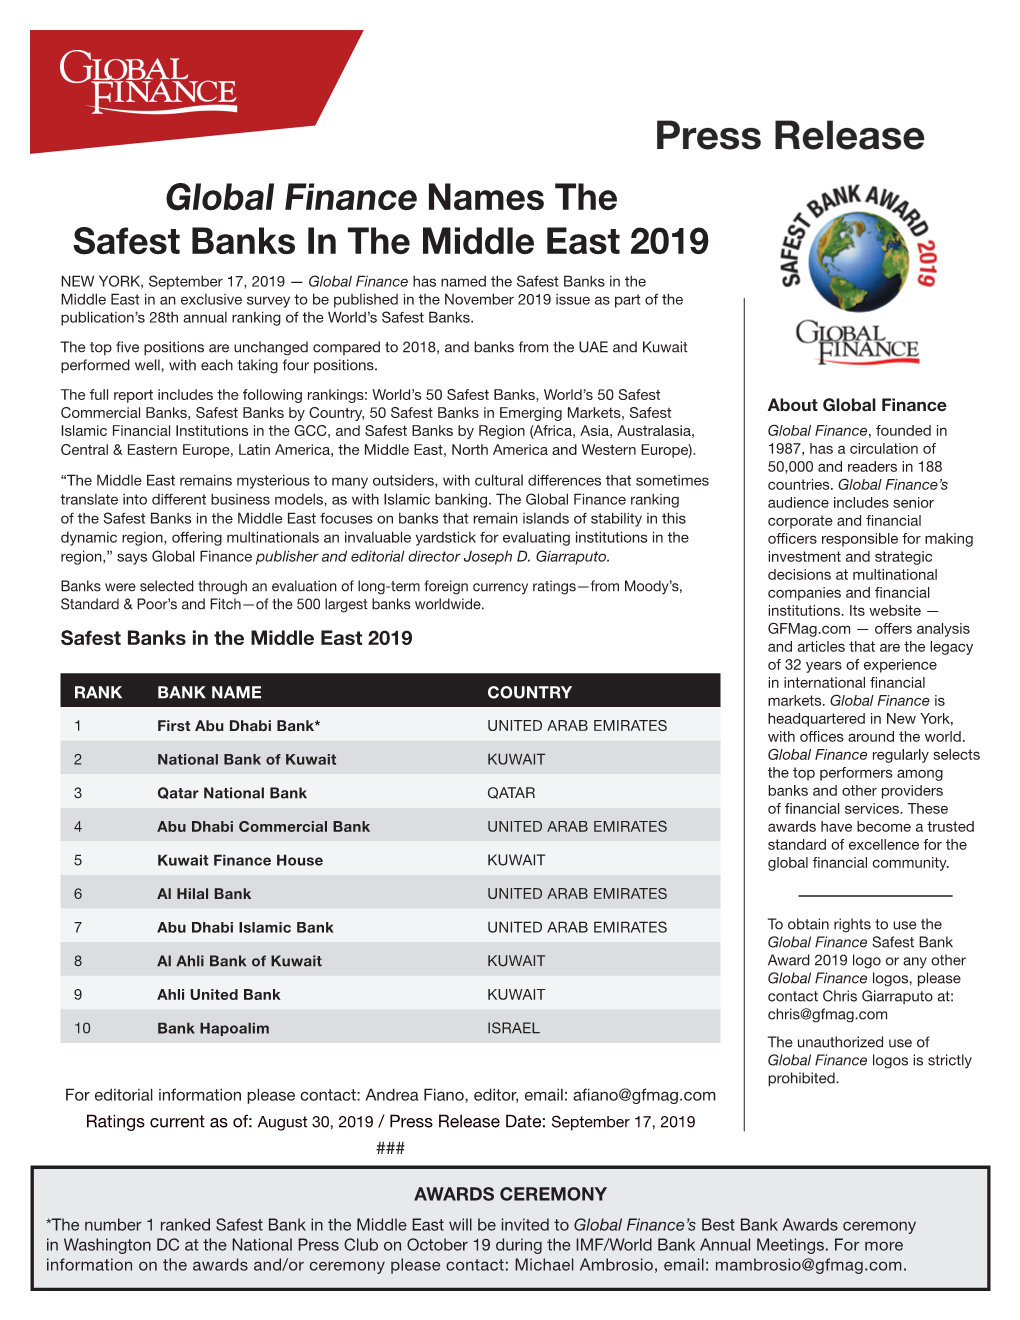 Global Finance Names the Safest Banks in the Middle East 2019